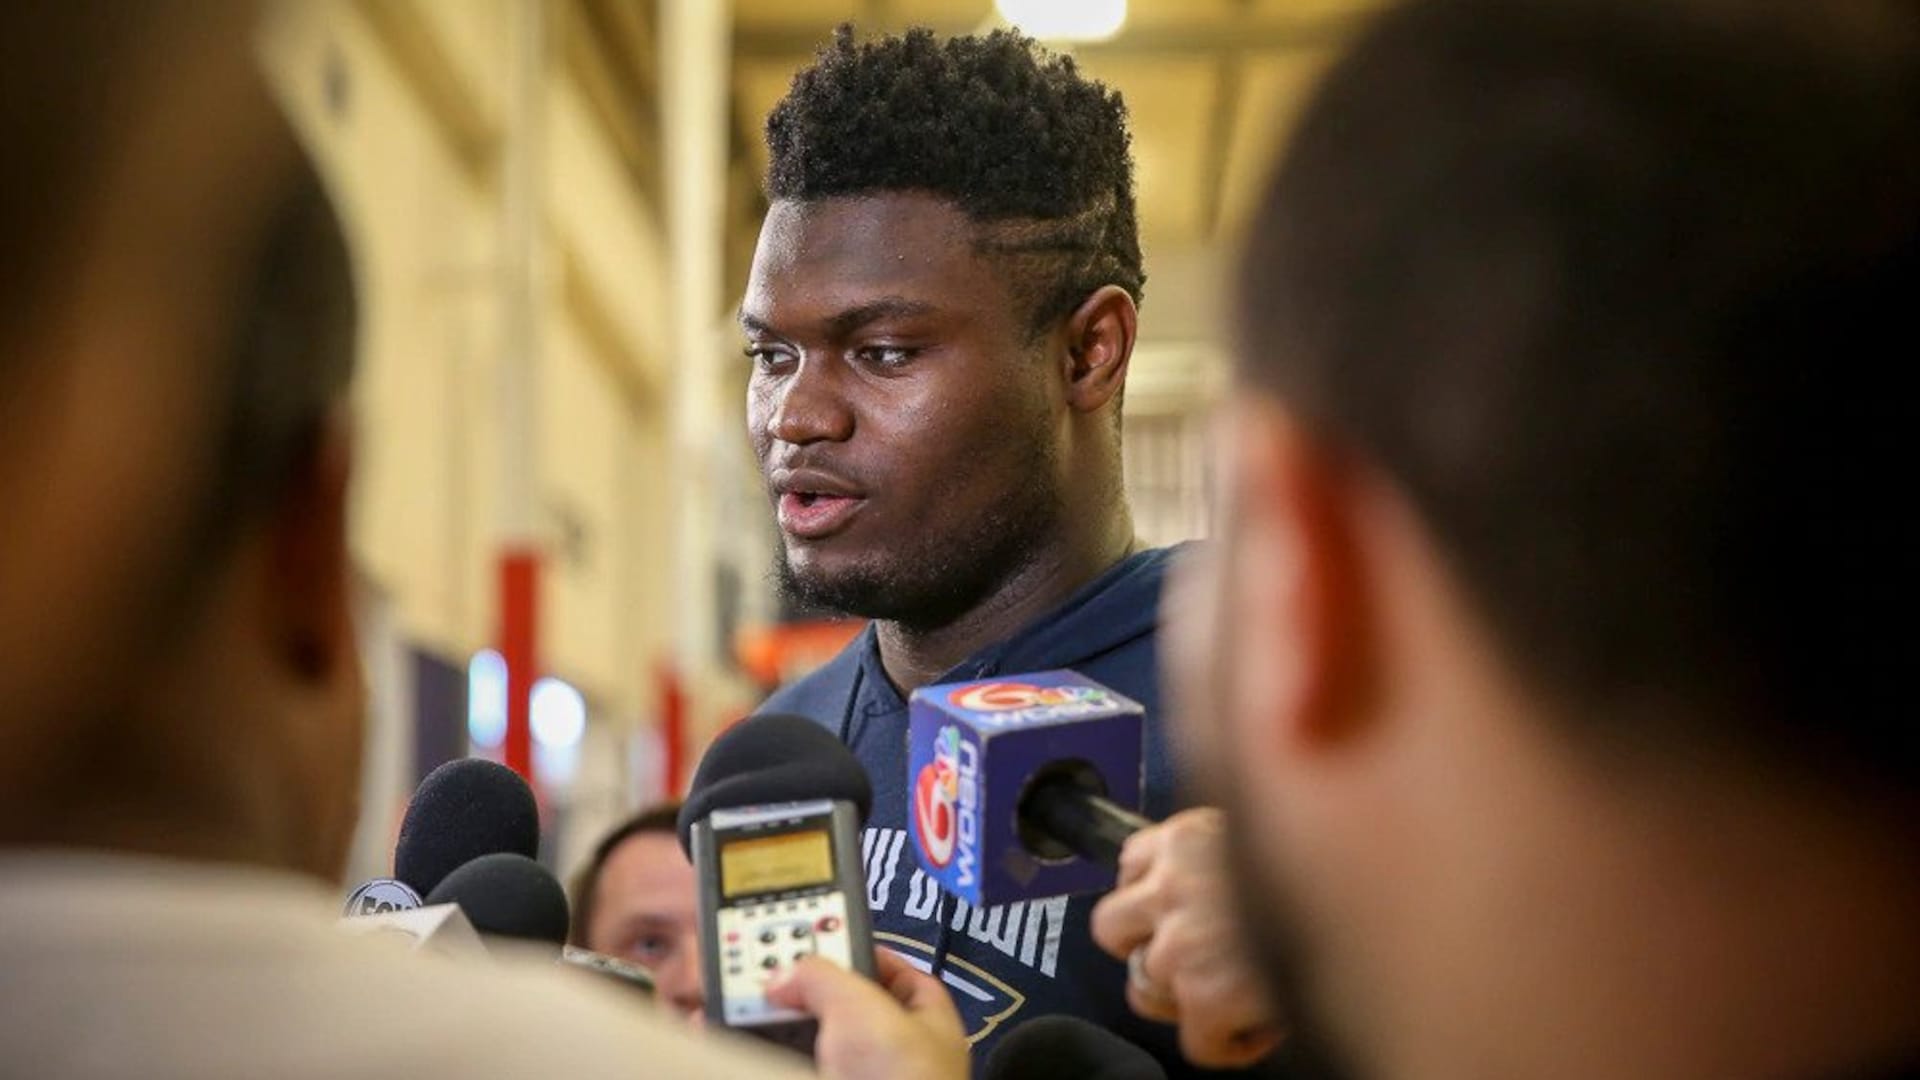 Zion Williamson preaching patience as he recovers from injury